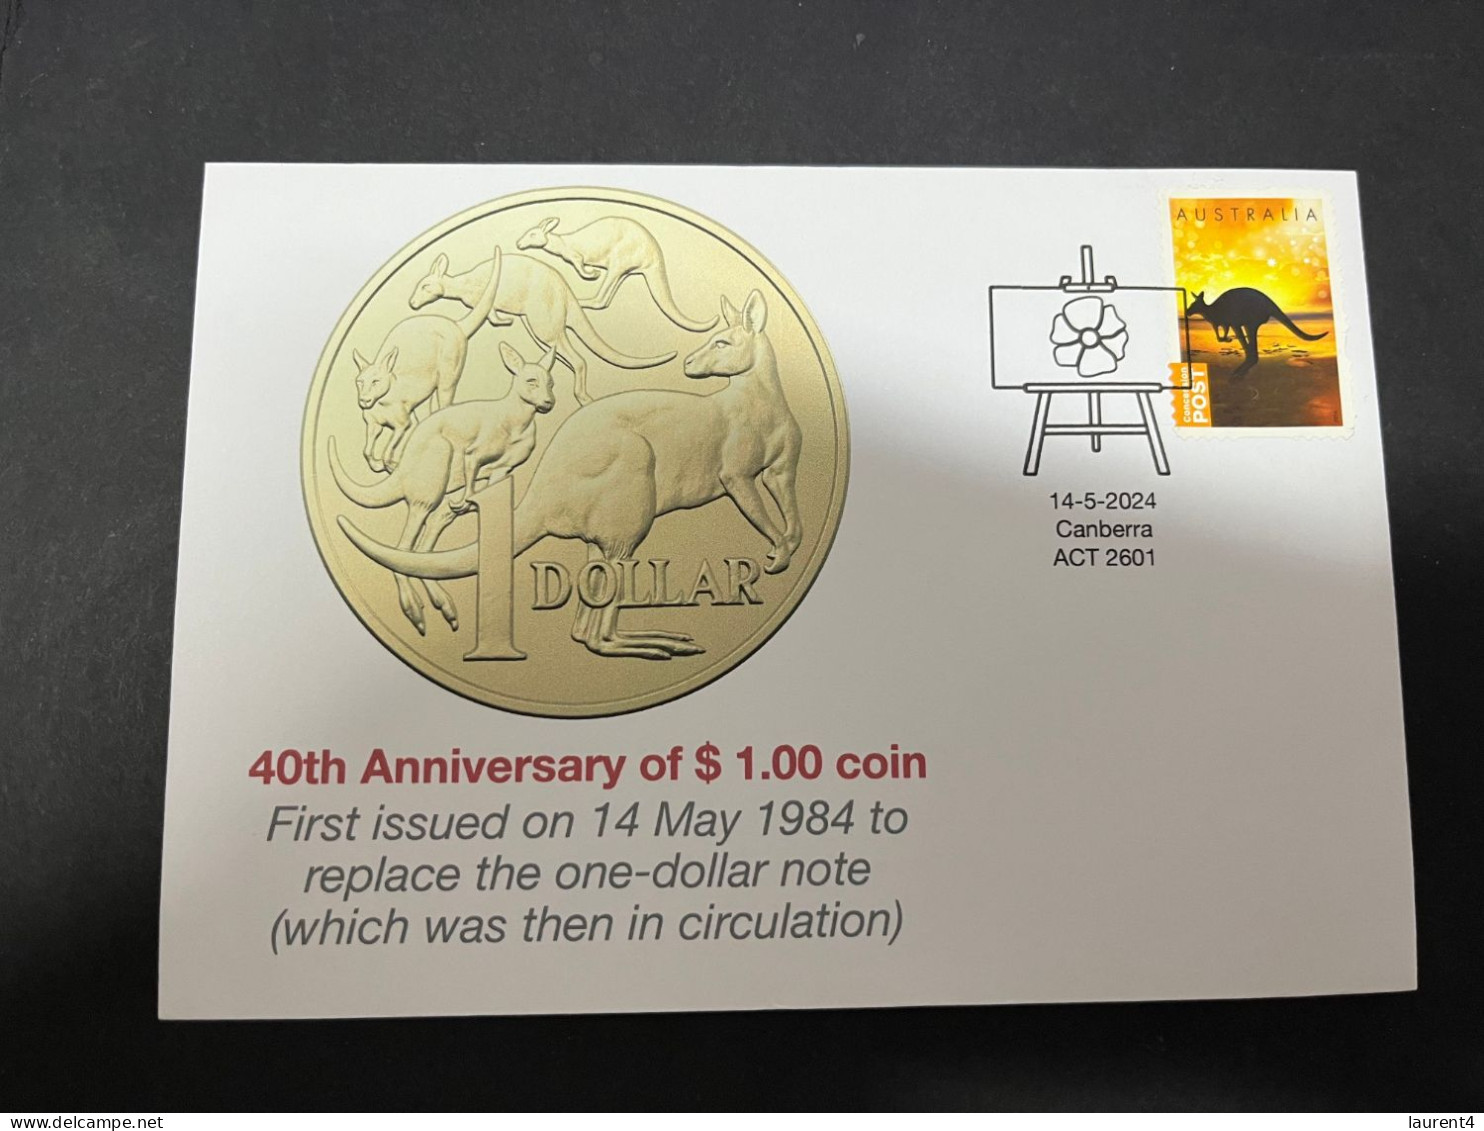 15-5-2024 (5 Z 12) Australia - 40th Anniversary Of The $ 1.00 Coin Released For 1st Time In Australia On 14-5-1984 - Monnaies